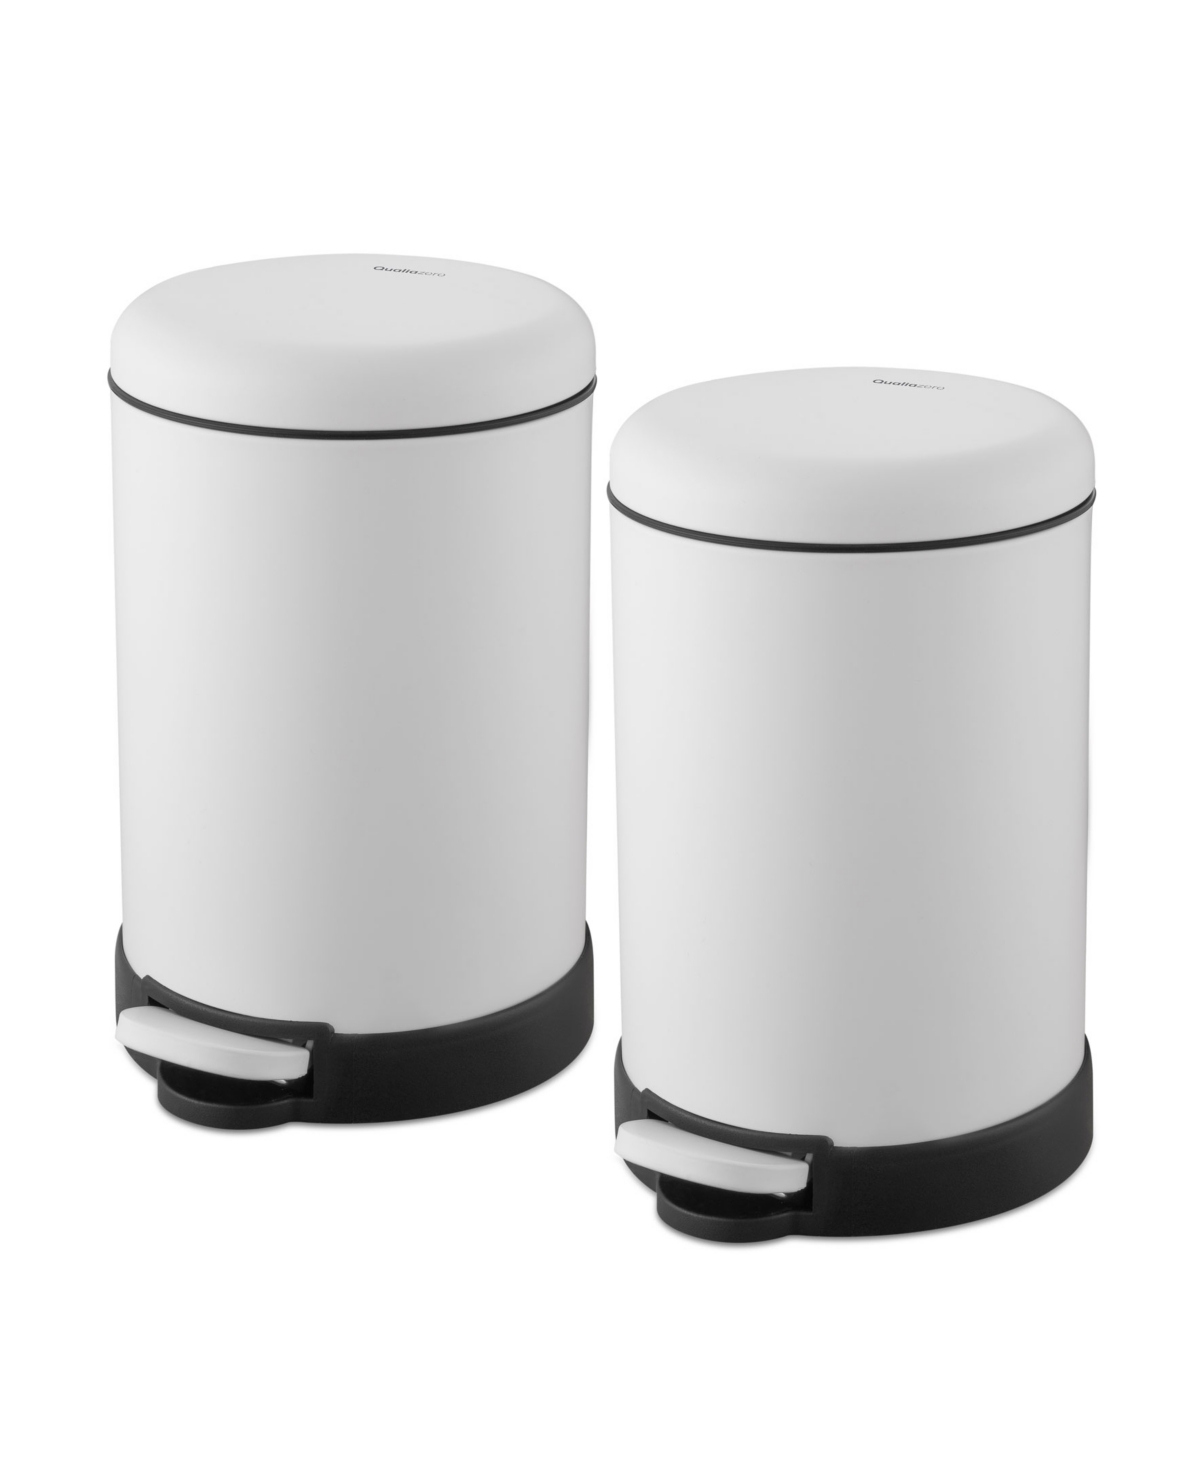 Qualiazero Two 1.6 Gallon Round Step On Trash Can Set, 2 Pieces, Twin Pack In Matte White